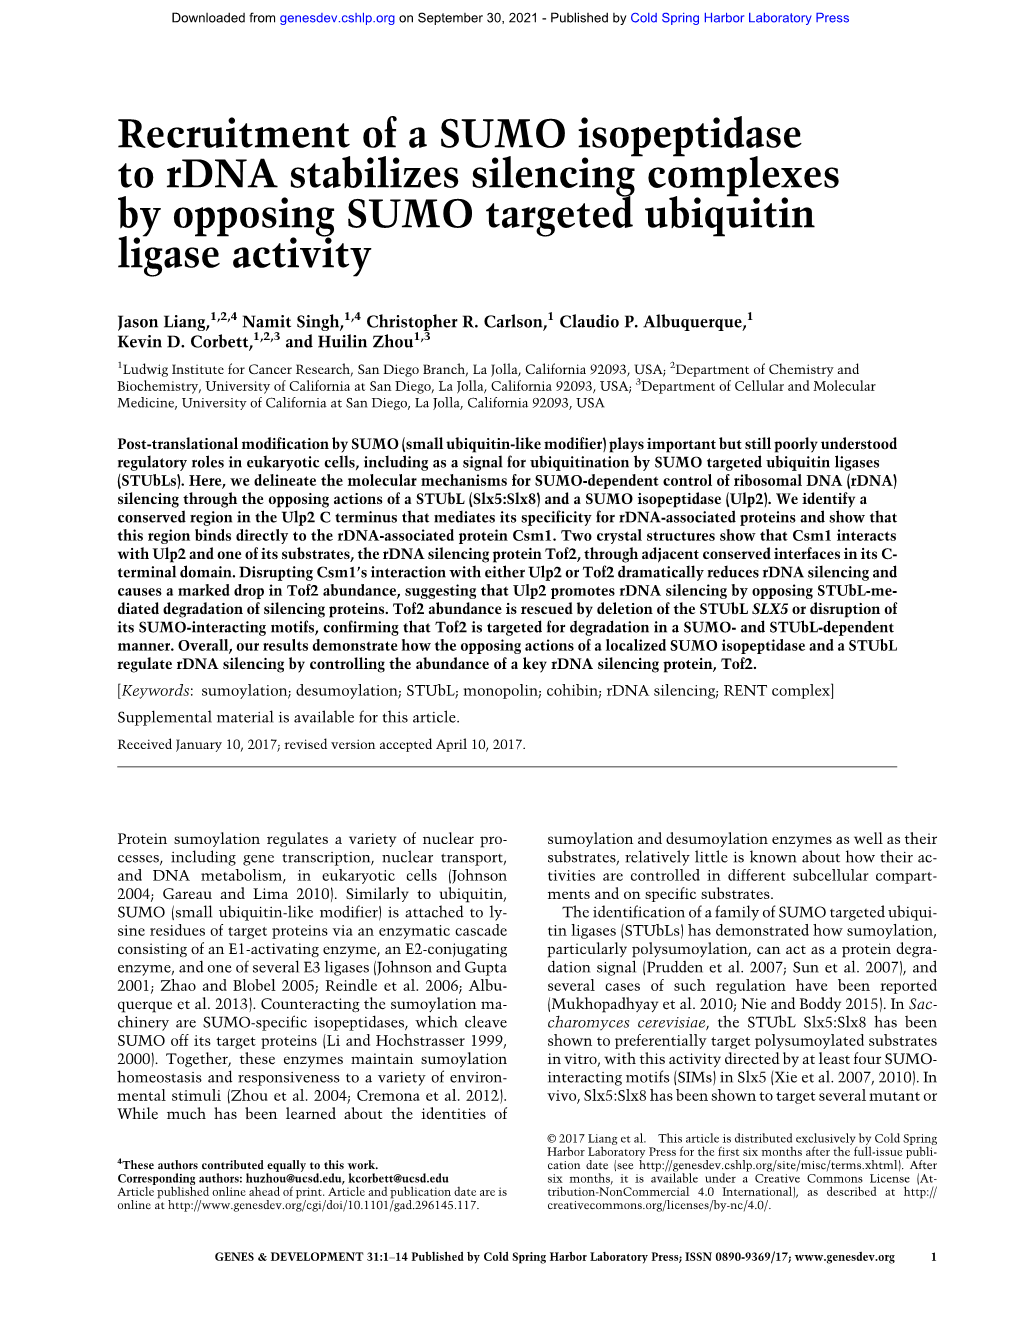 Recruitment of a SUMO Isopeptidase to Rdna Stabilizes Silencing Complexes by Opposing SUMO Targeted Ubiquitin Ligase Activity